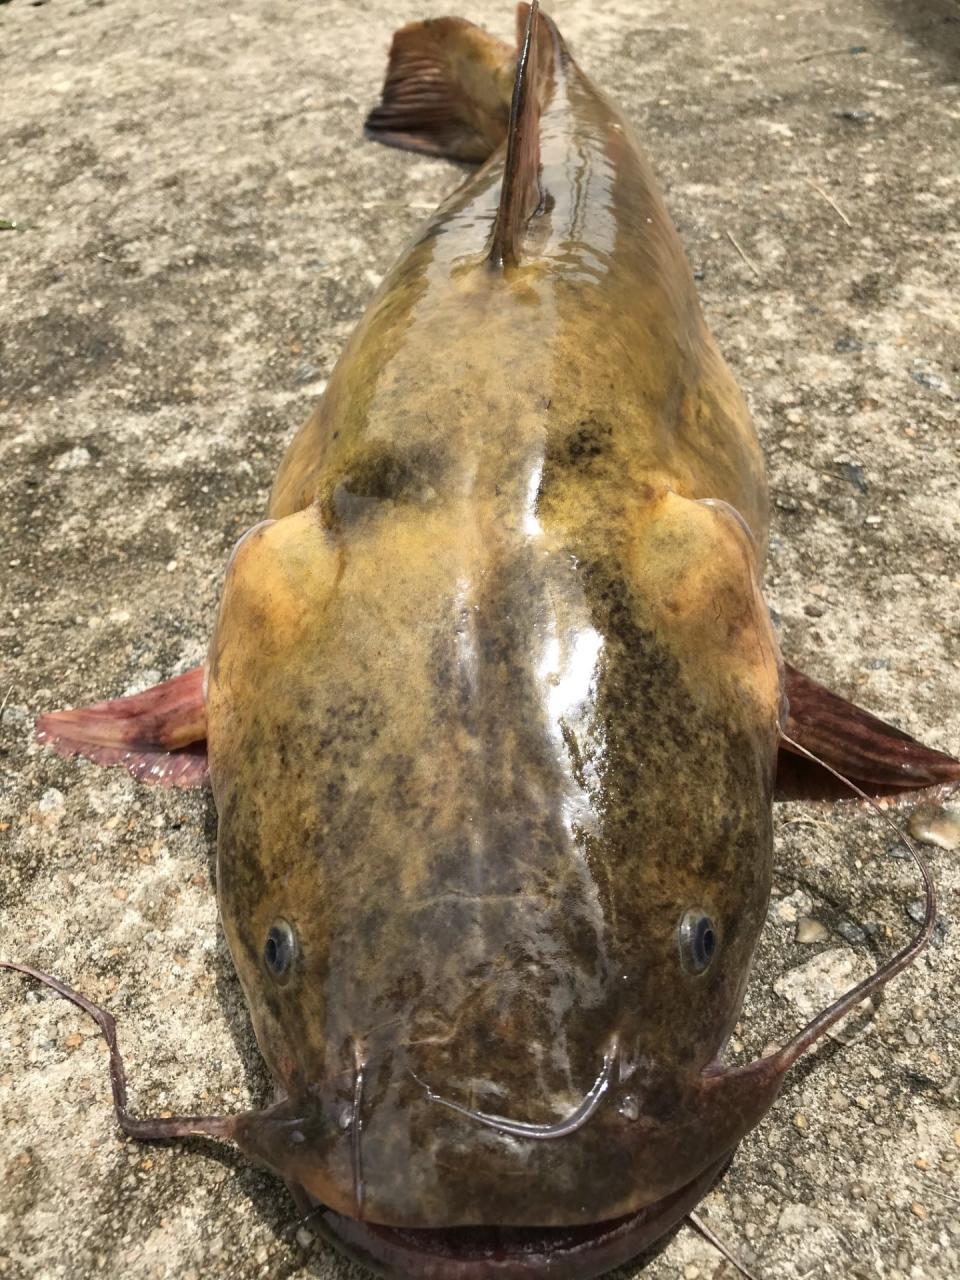 Flathead catfish can grow over 100 pounds, outsizing many native species and taking up resources, like food and space, in local waters.